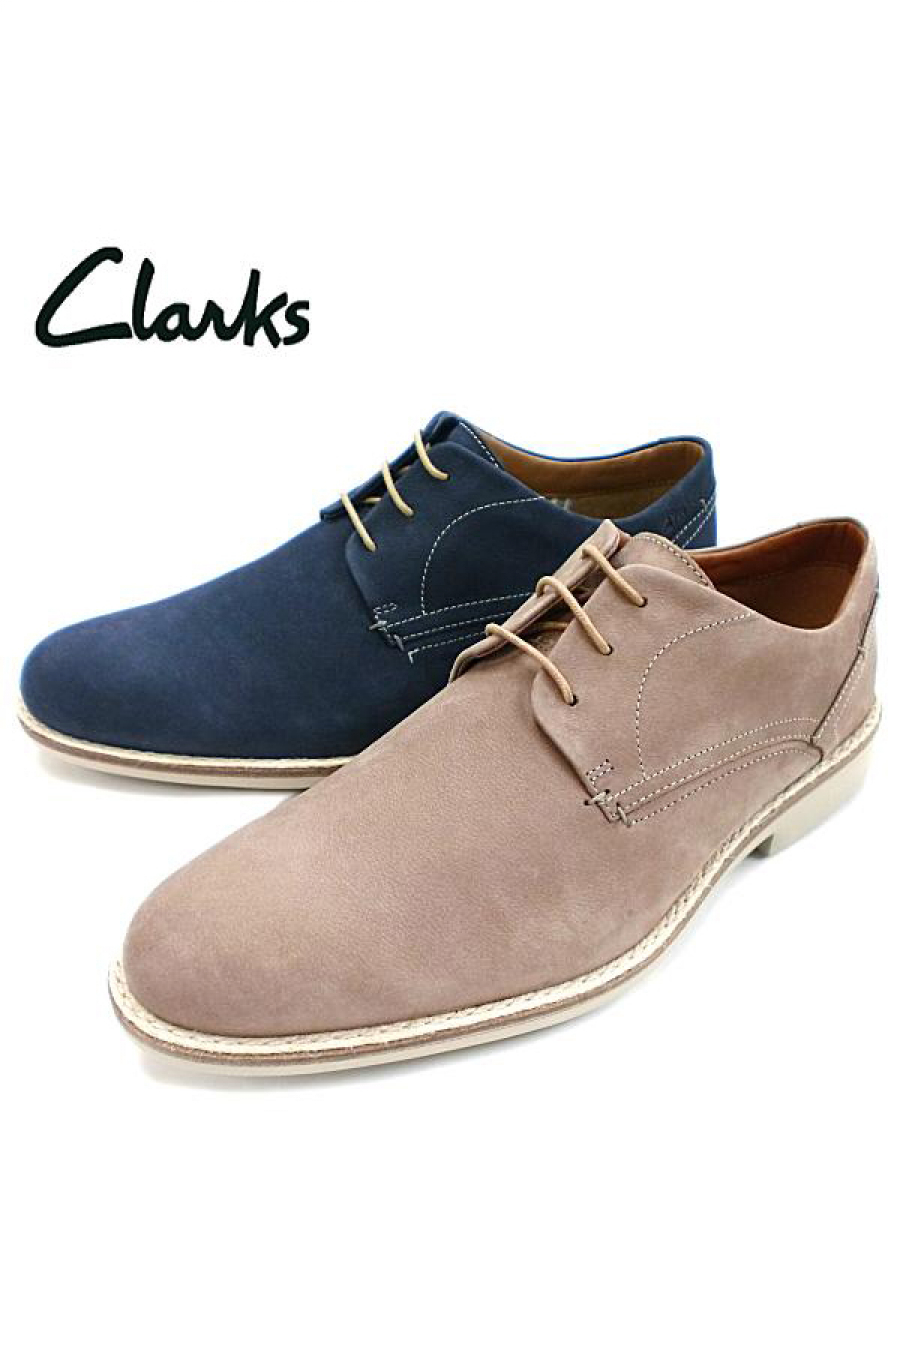 looking for clarks shoes